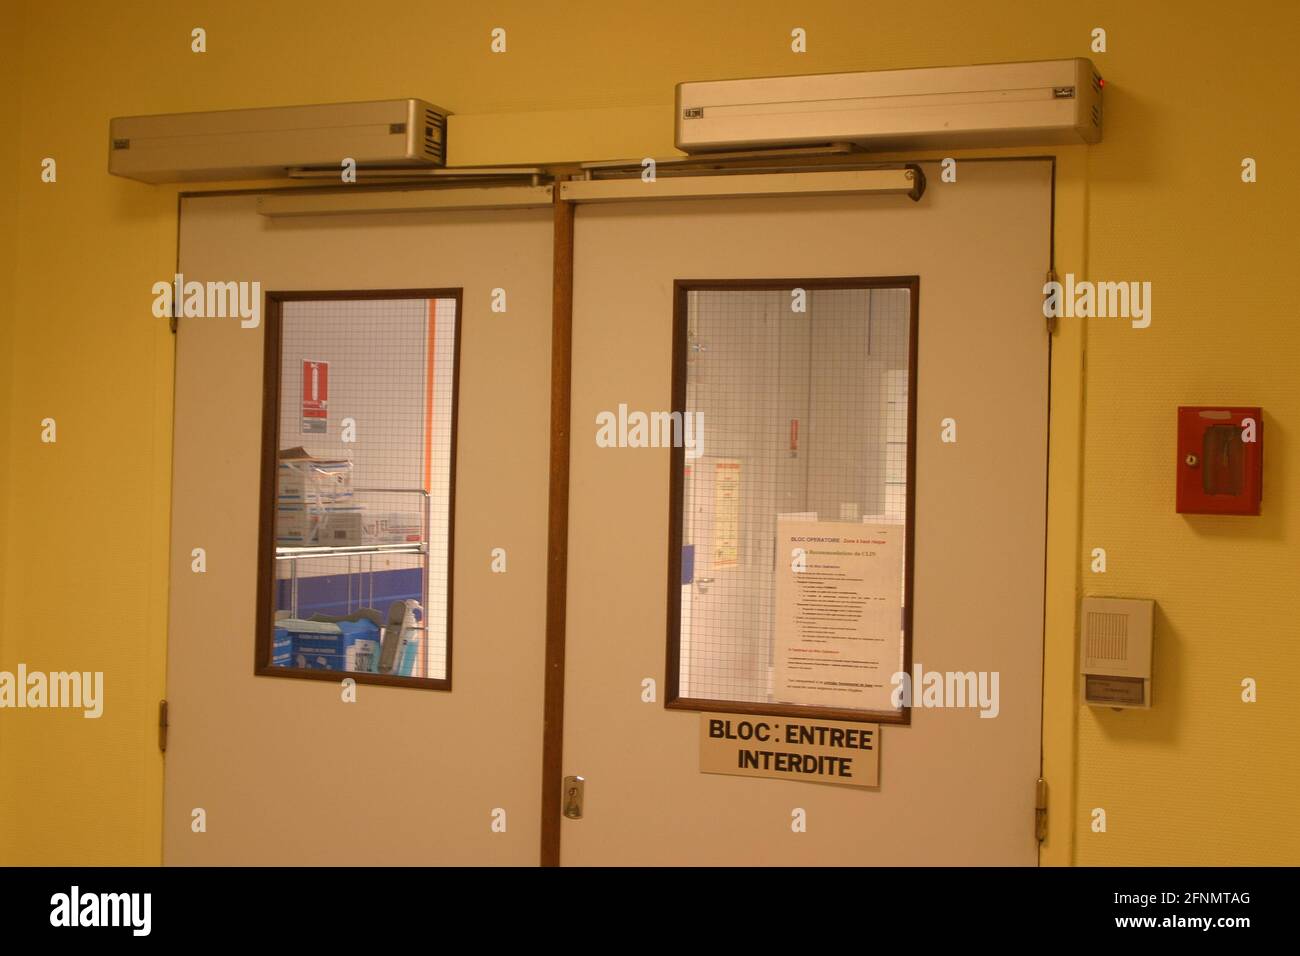 Surgical block entrance, France Stock Photo